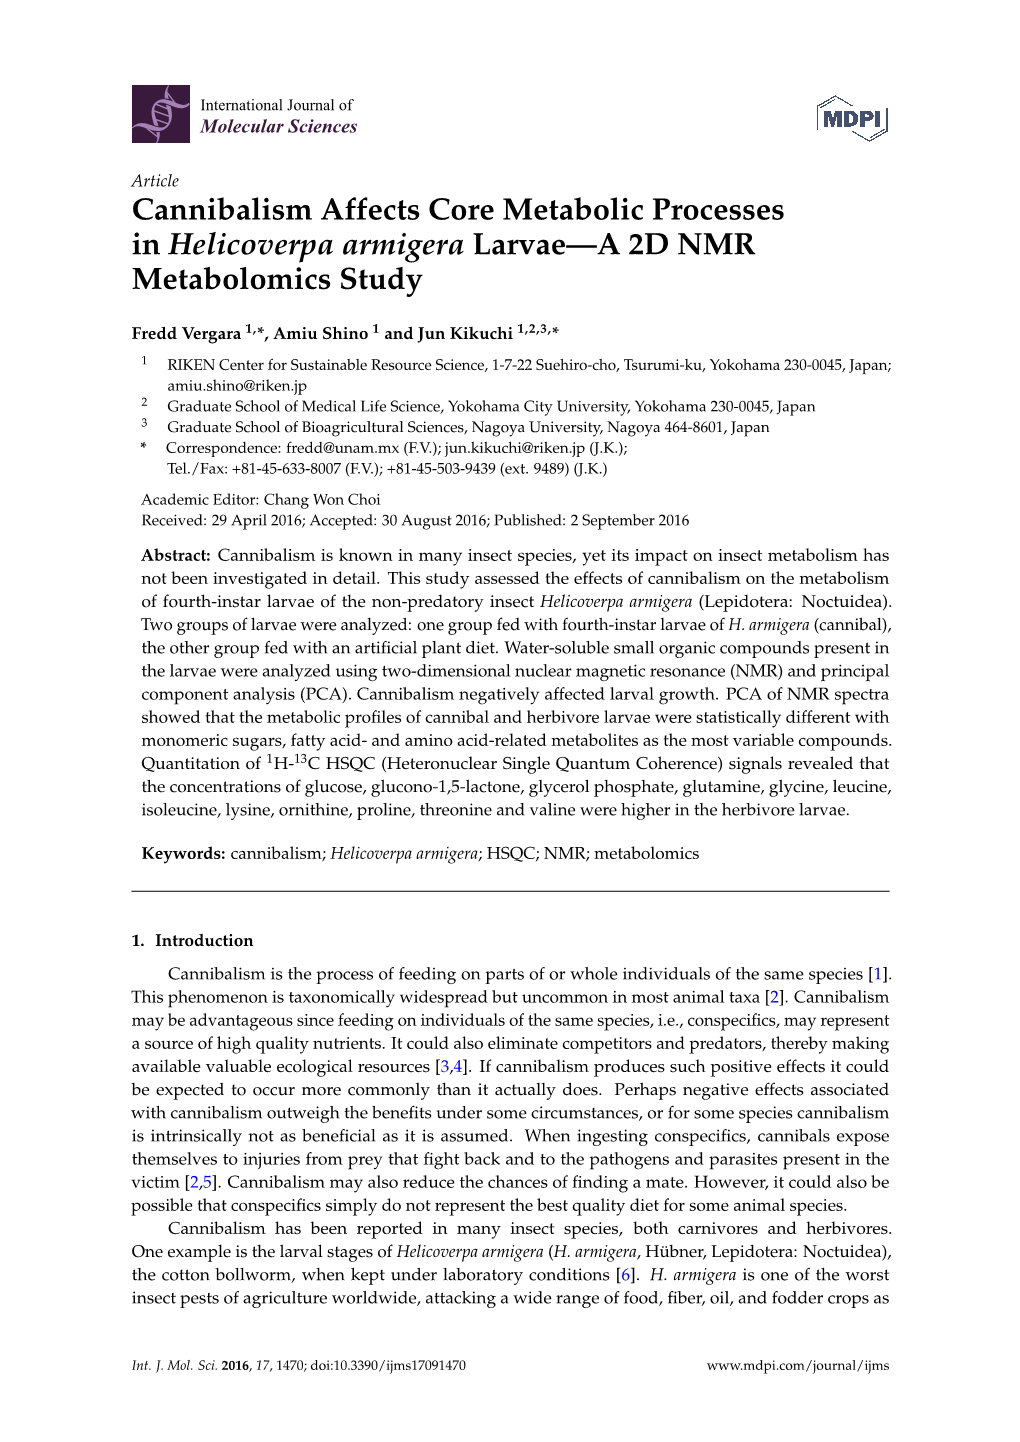 Cannibalism Affects Core Metabolic Processes in Helicoverpa Armigera Larvae—A 2D NMR Metabolomics Study